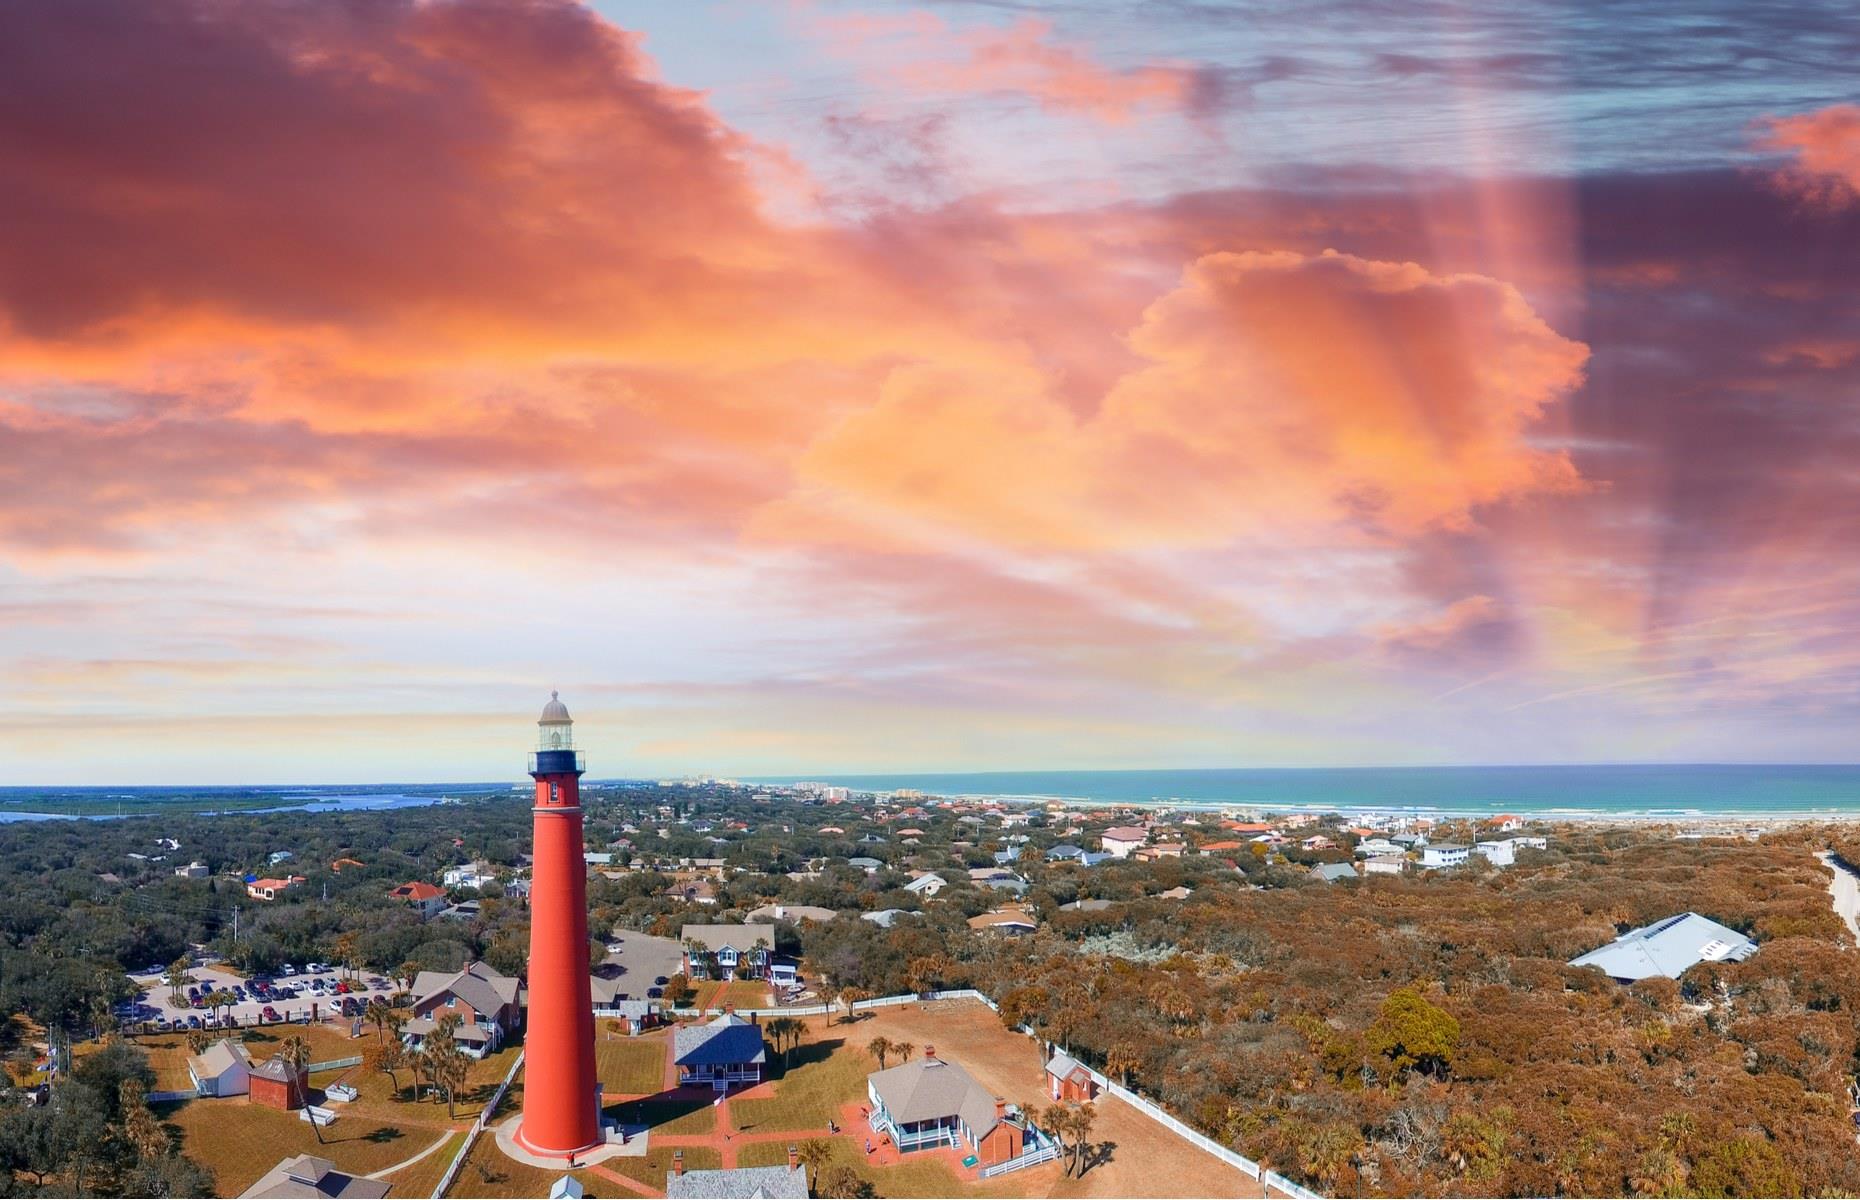 <p>This striking 175-foot (53m) tall red tower, located 10 miles (16km) south of Daytona Beach, is the tallest lighthouse in Florida. Built in the 1880s, it’s also one of the best-preserved light stations in the US and was designated a National Historic Landmark in 1998. Today, many visitors choose to climb the 203 steps to the top for incredible panoramic views across the Atlantic coast.</p>